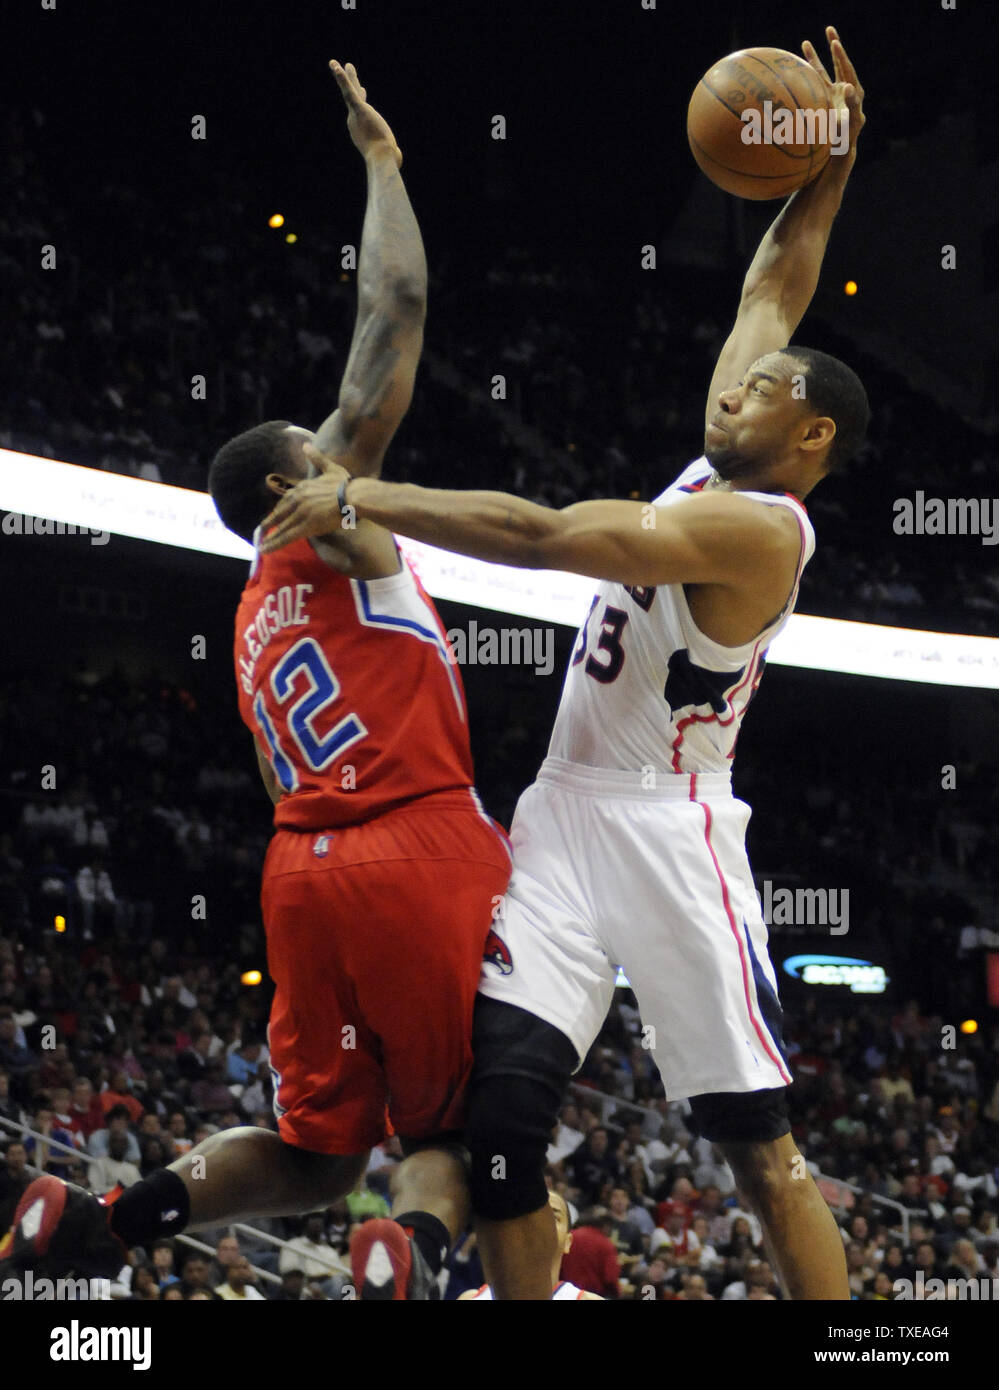 Atlanta Hawks guard Willie Green (33) goes over Los Angeles Clippers point guard Eric Bledsoe (12) in the second half at Philips Arena in Atlanta on April 24, 2012. UPI/David Tulis Stock Photo